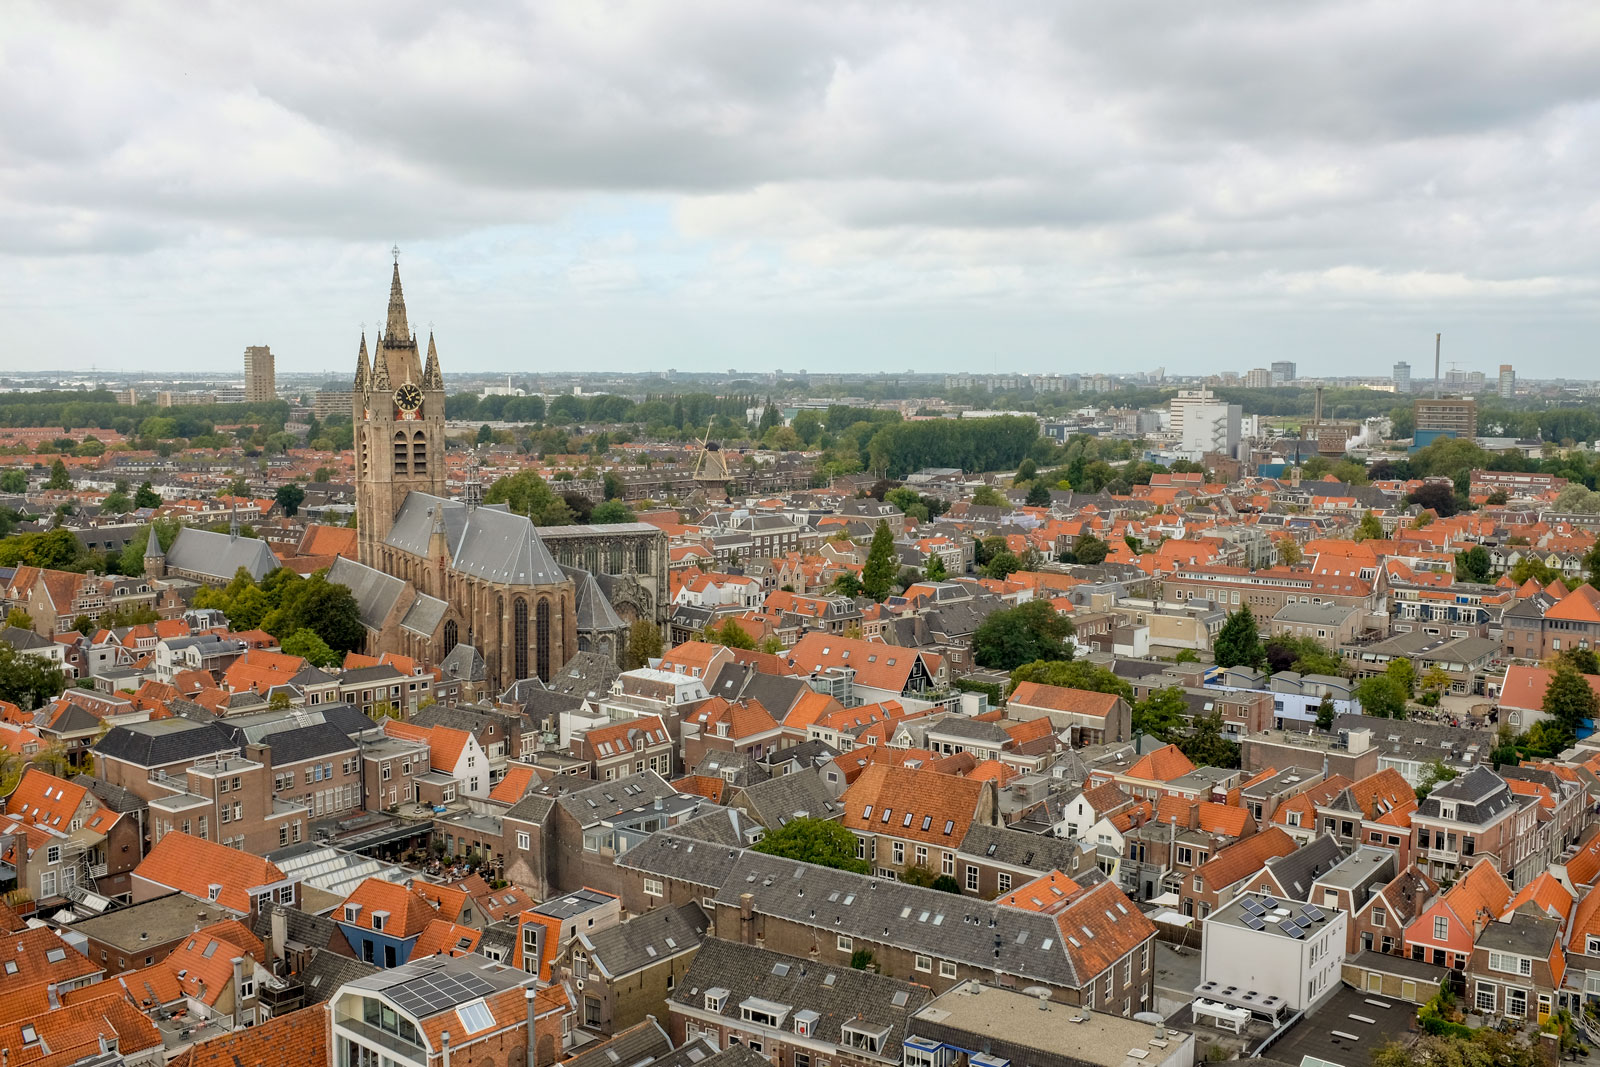 View of Delft from the top of the tower at the city's New Church